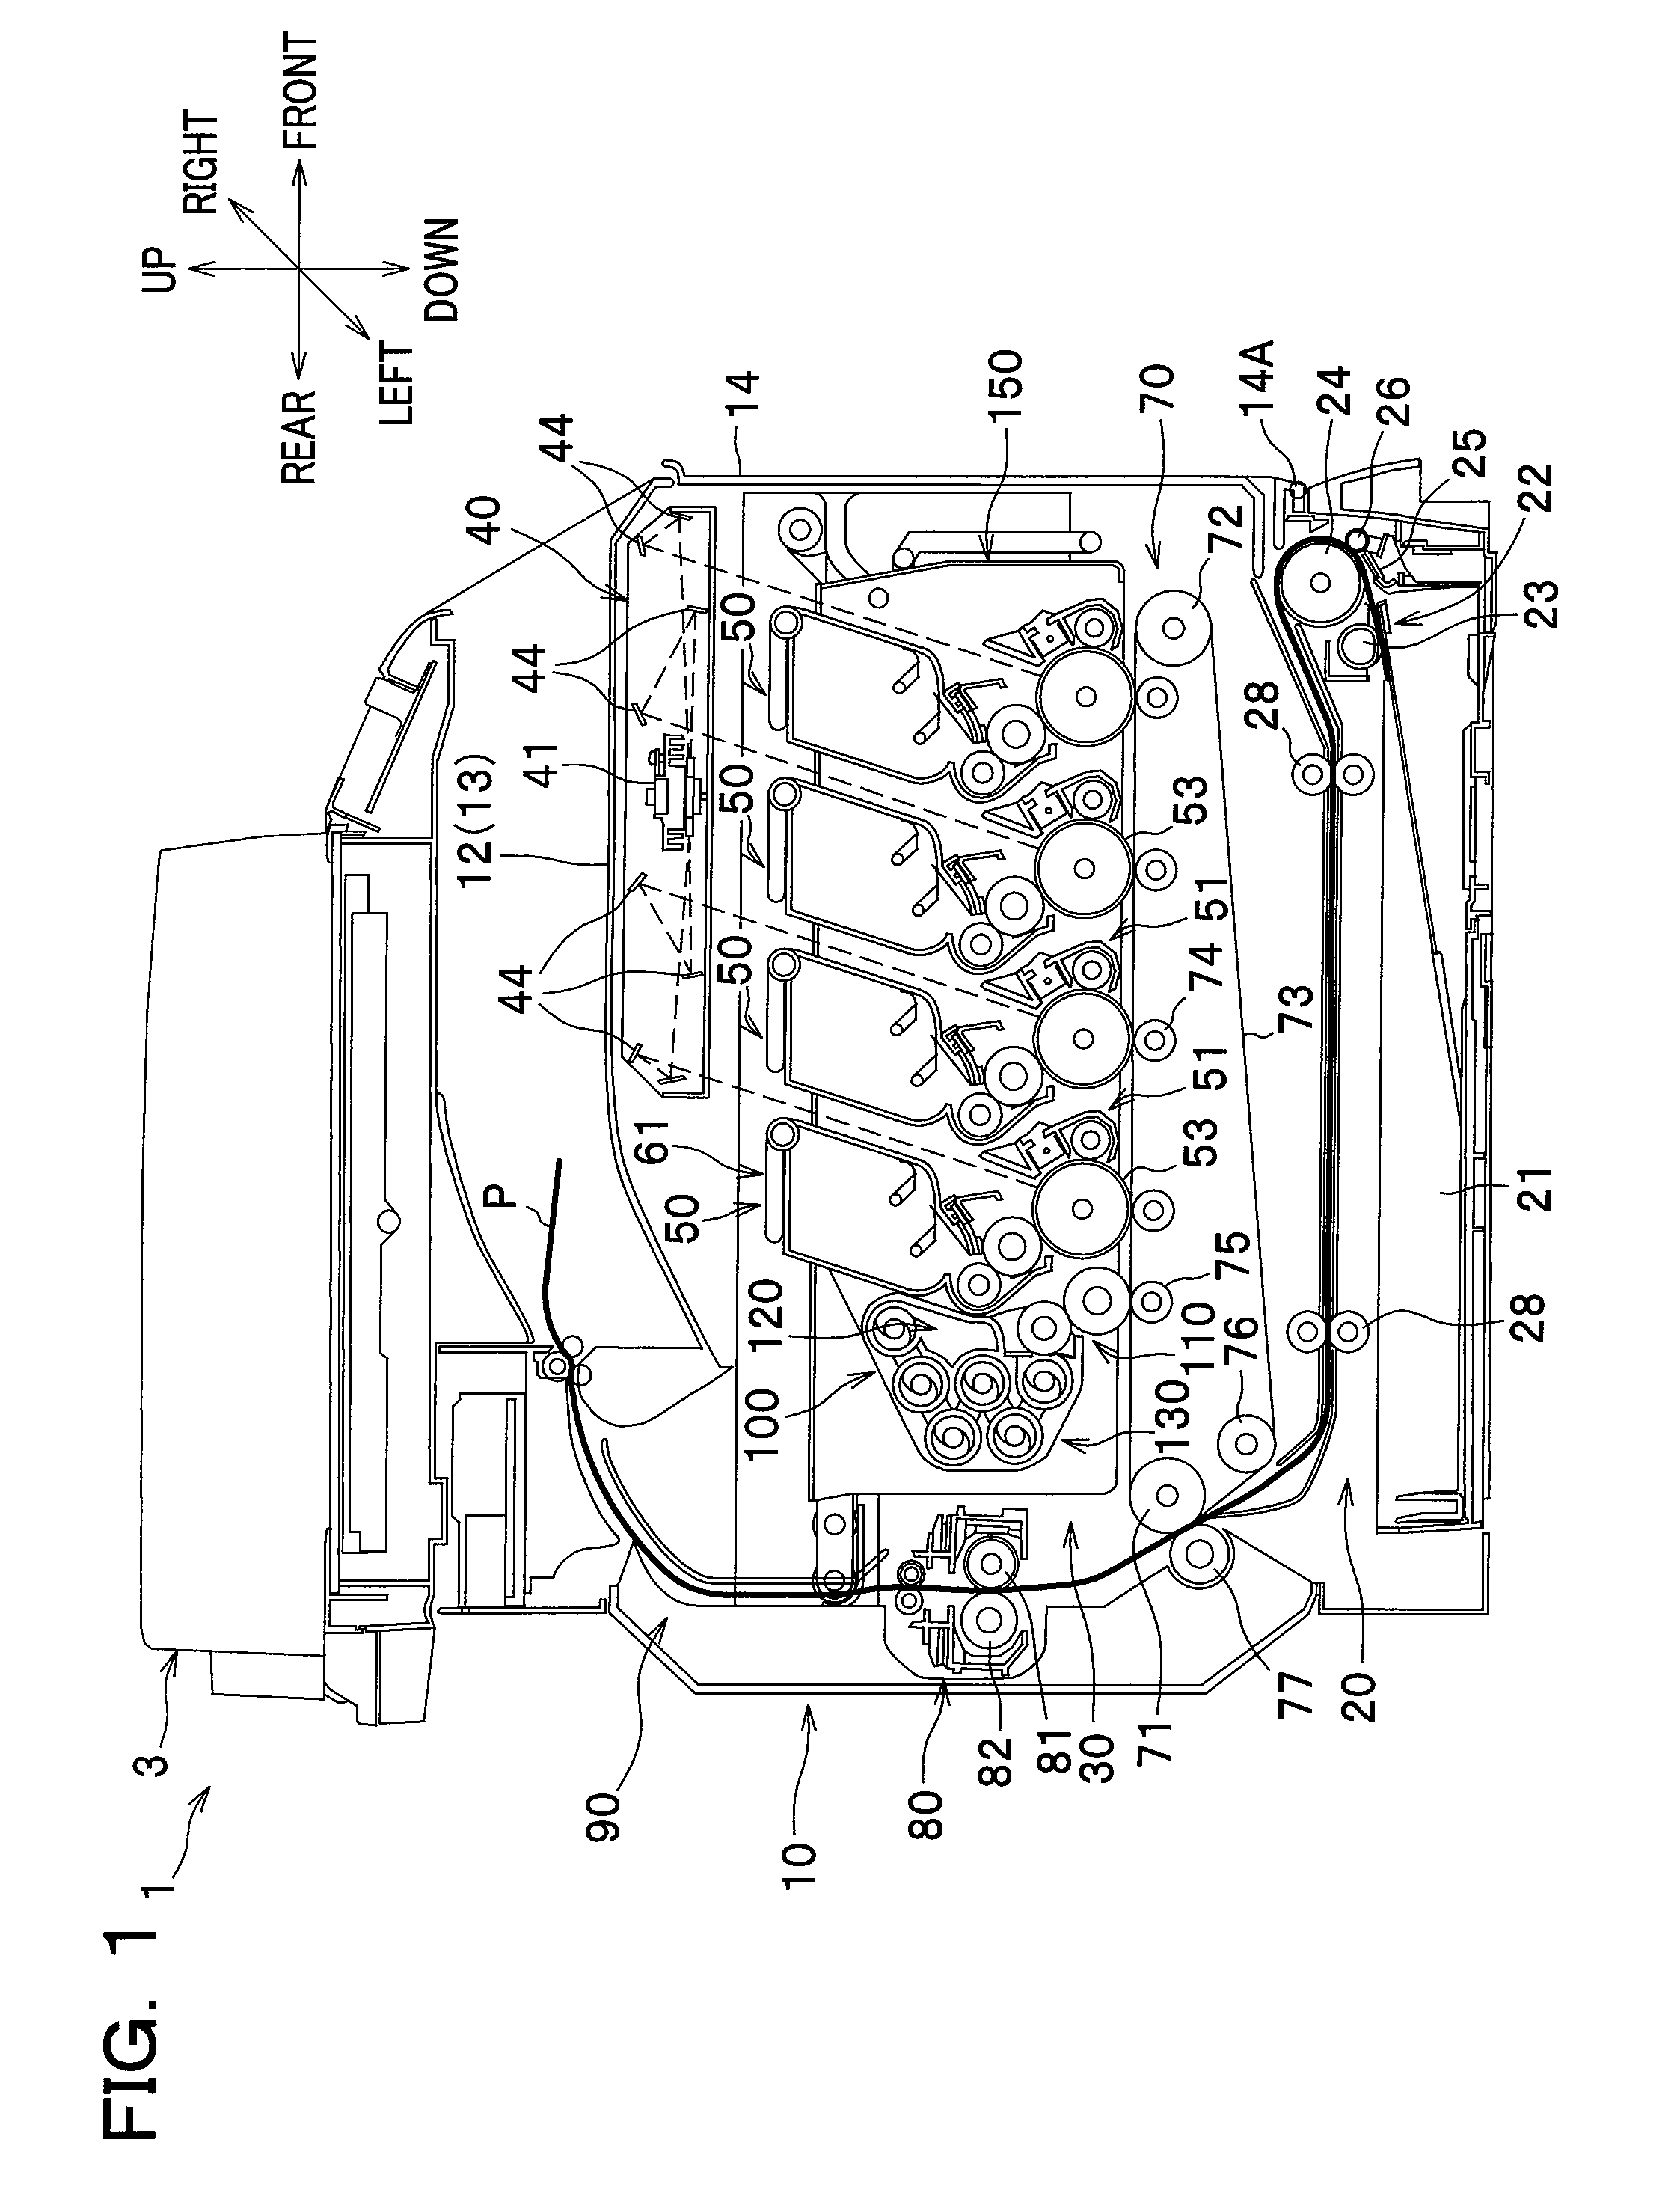 Image forming apparatus with a cleaning device